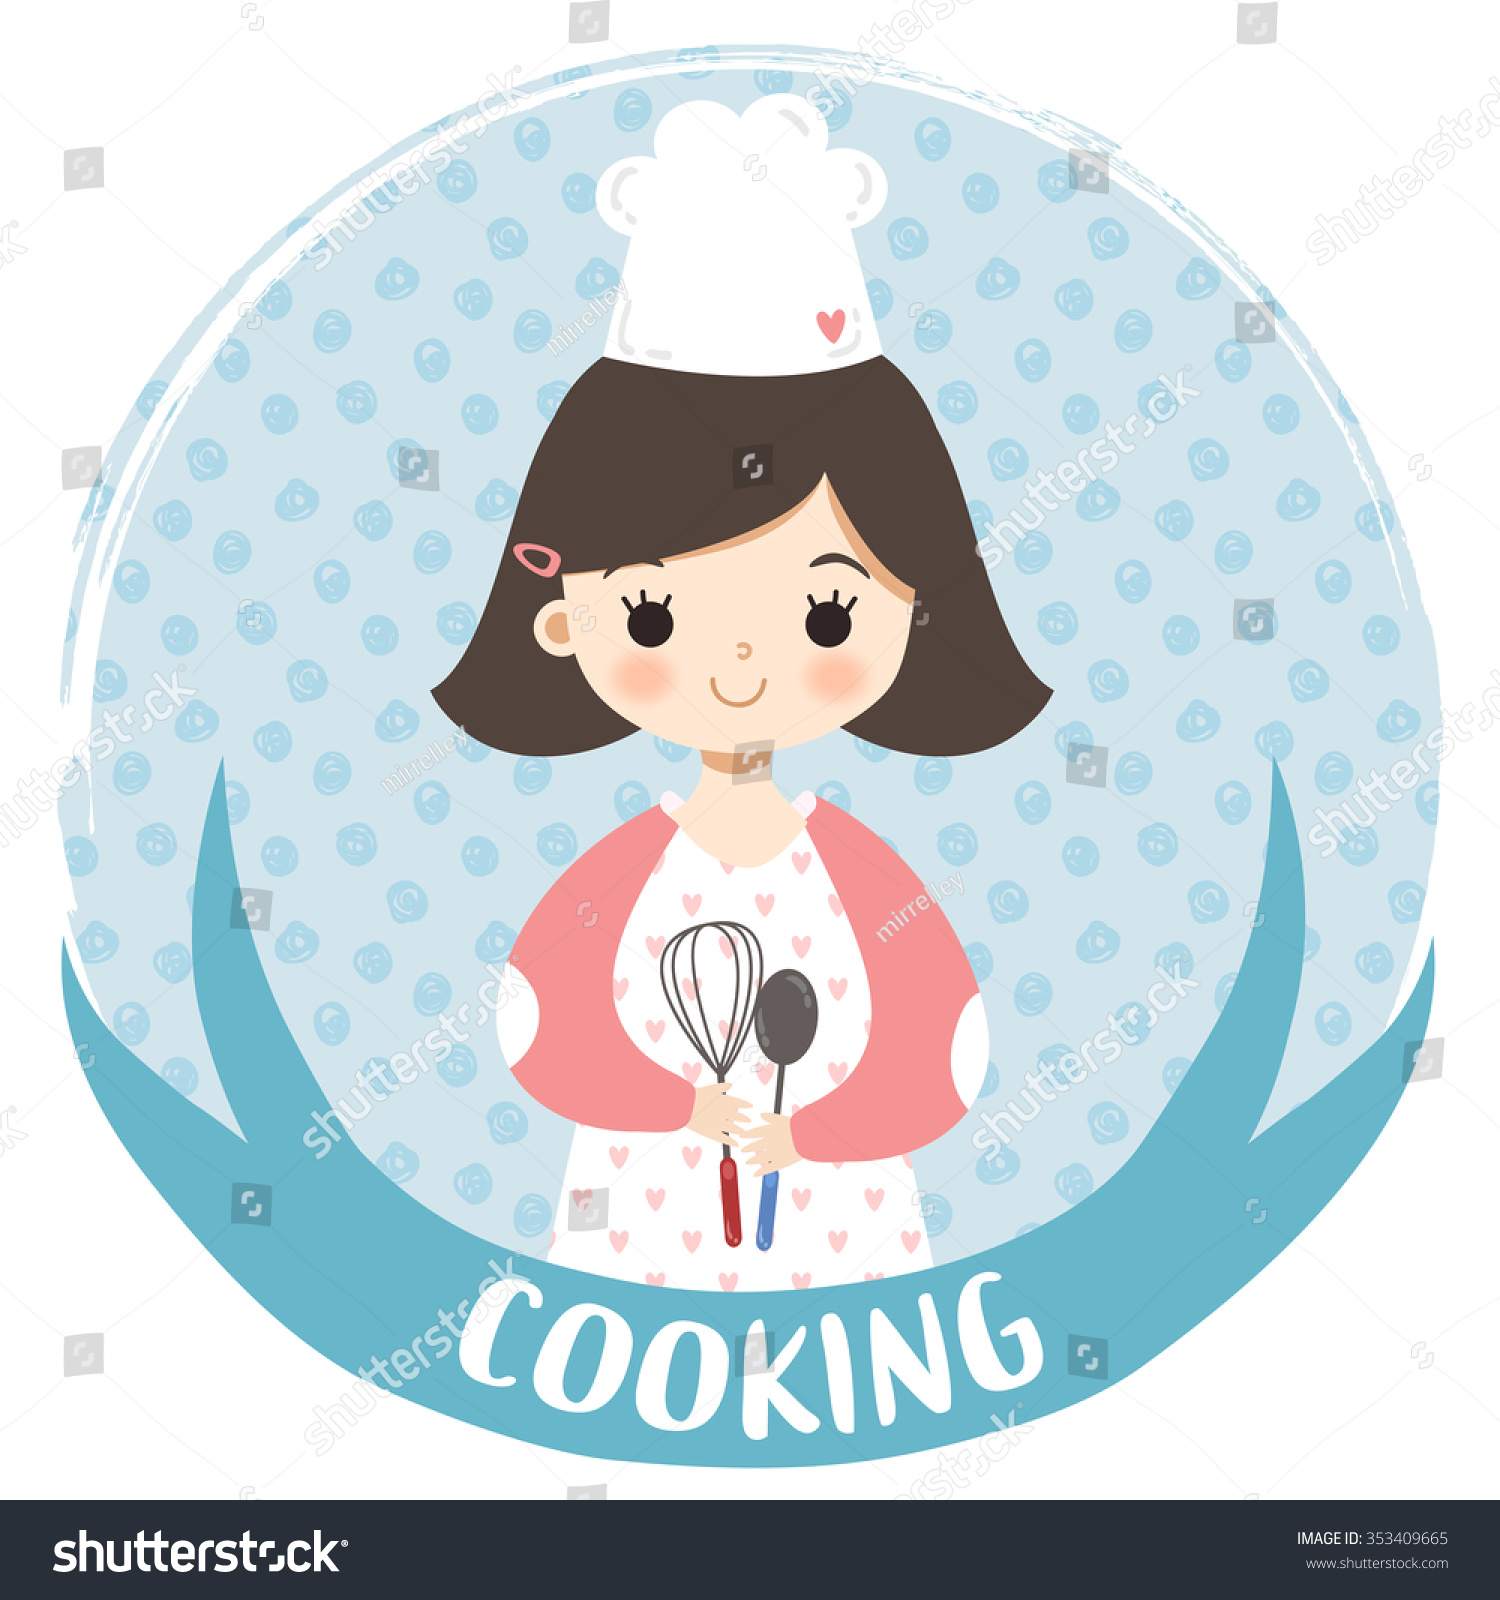 clipart of girl cooking - photo #42